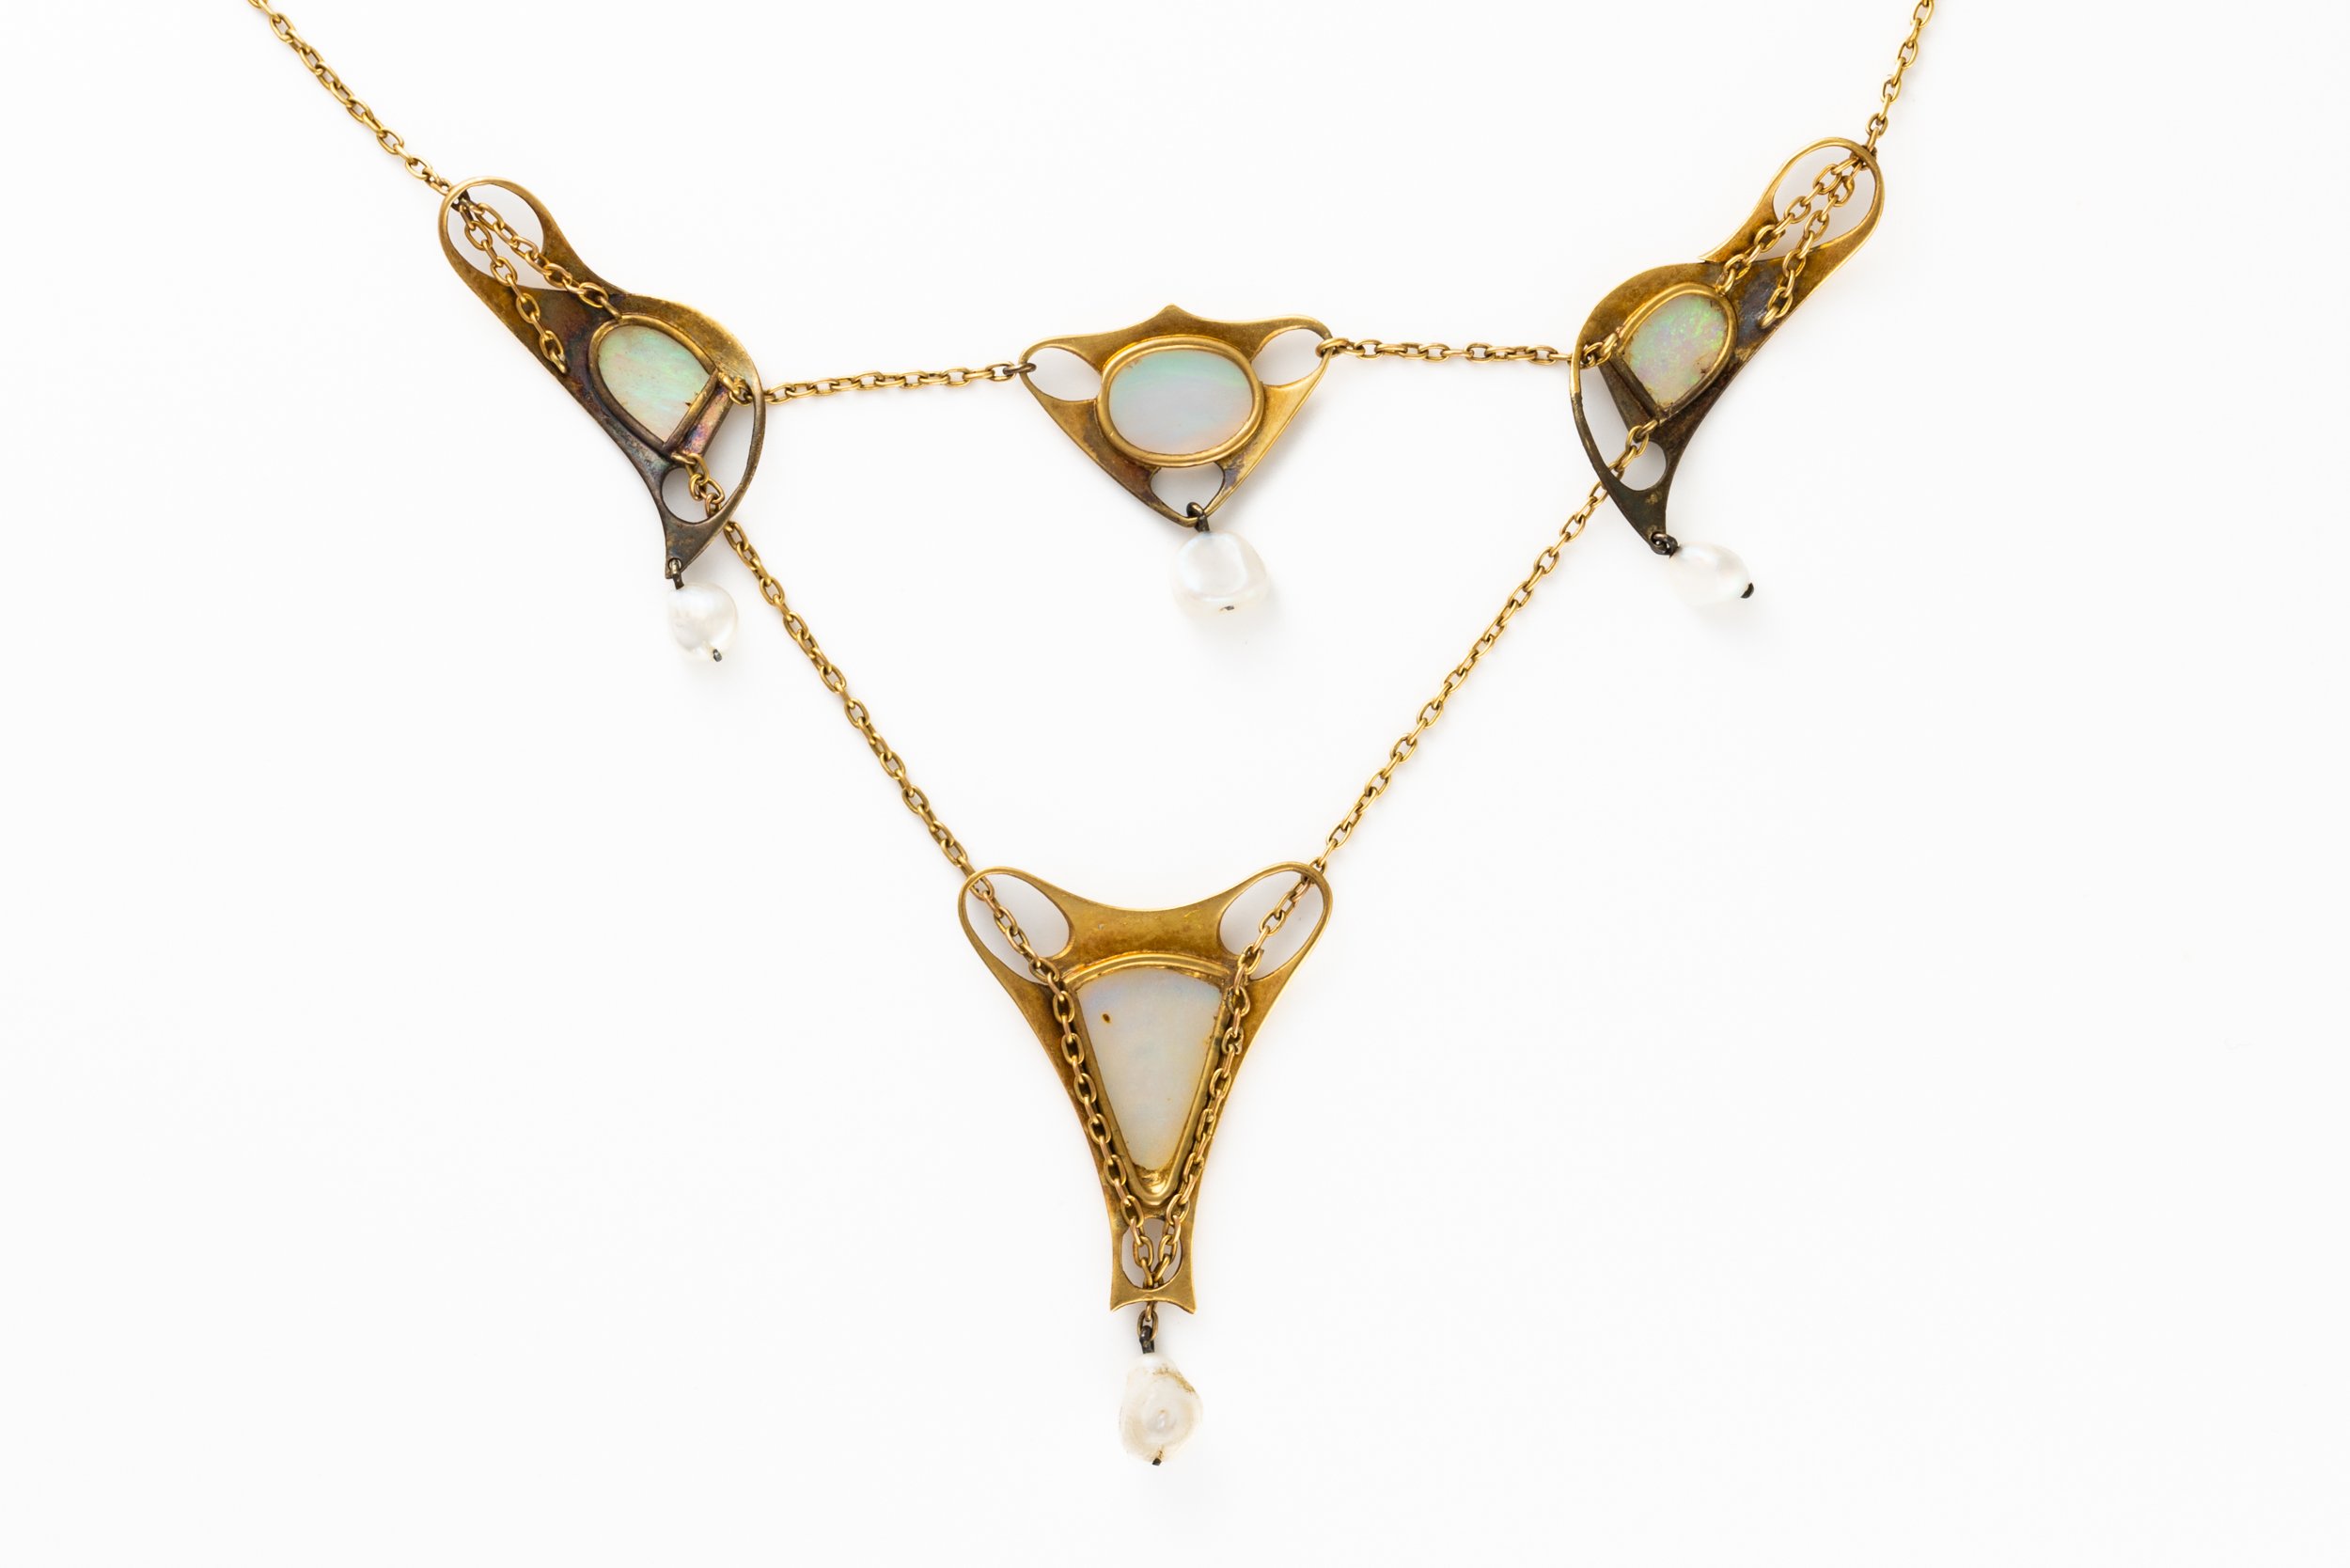 AN ART NOUVEAU OPAL AND PEARL NECKLACE - Image 5 of 6